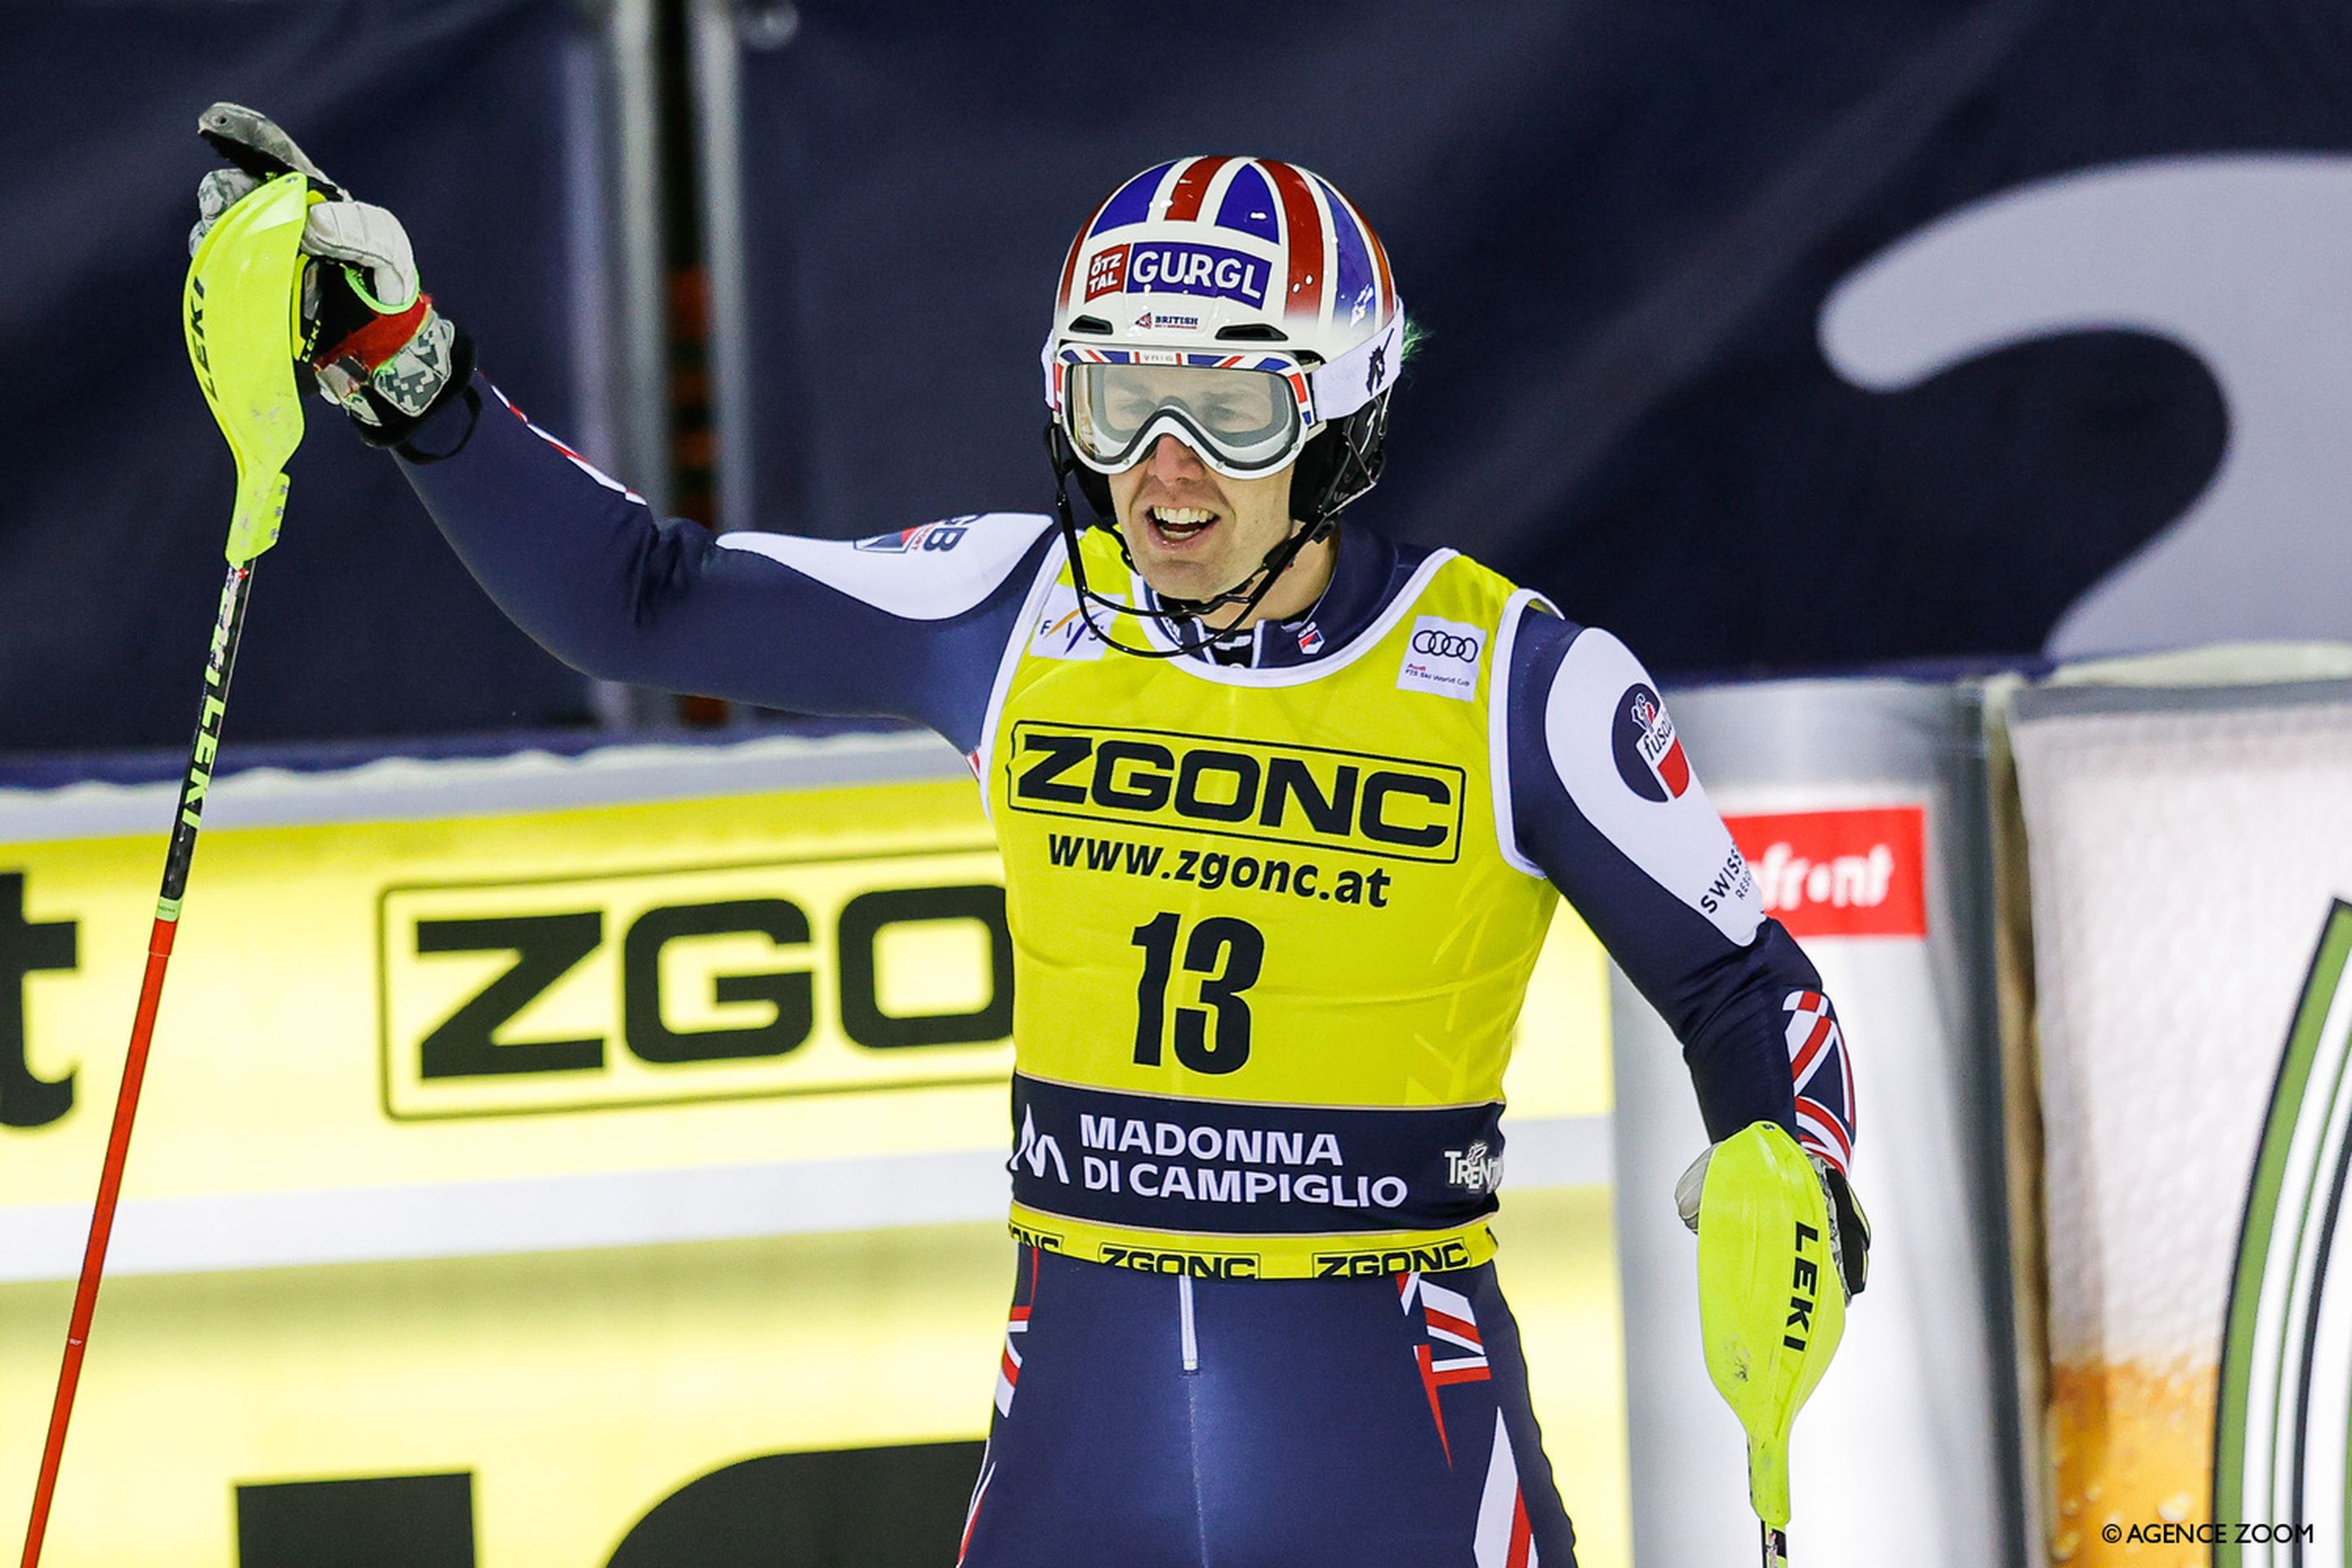 Ryding is ecstatic after his second run and third place finish (Agence Zoom)